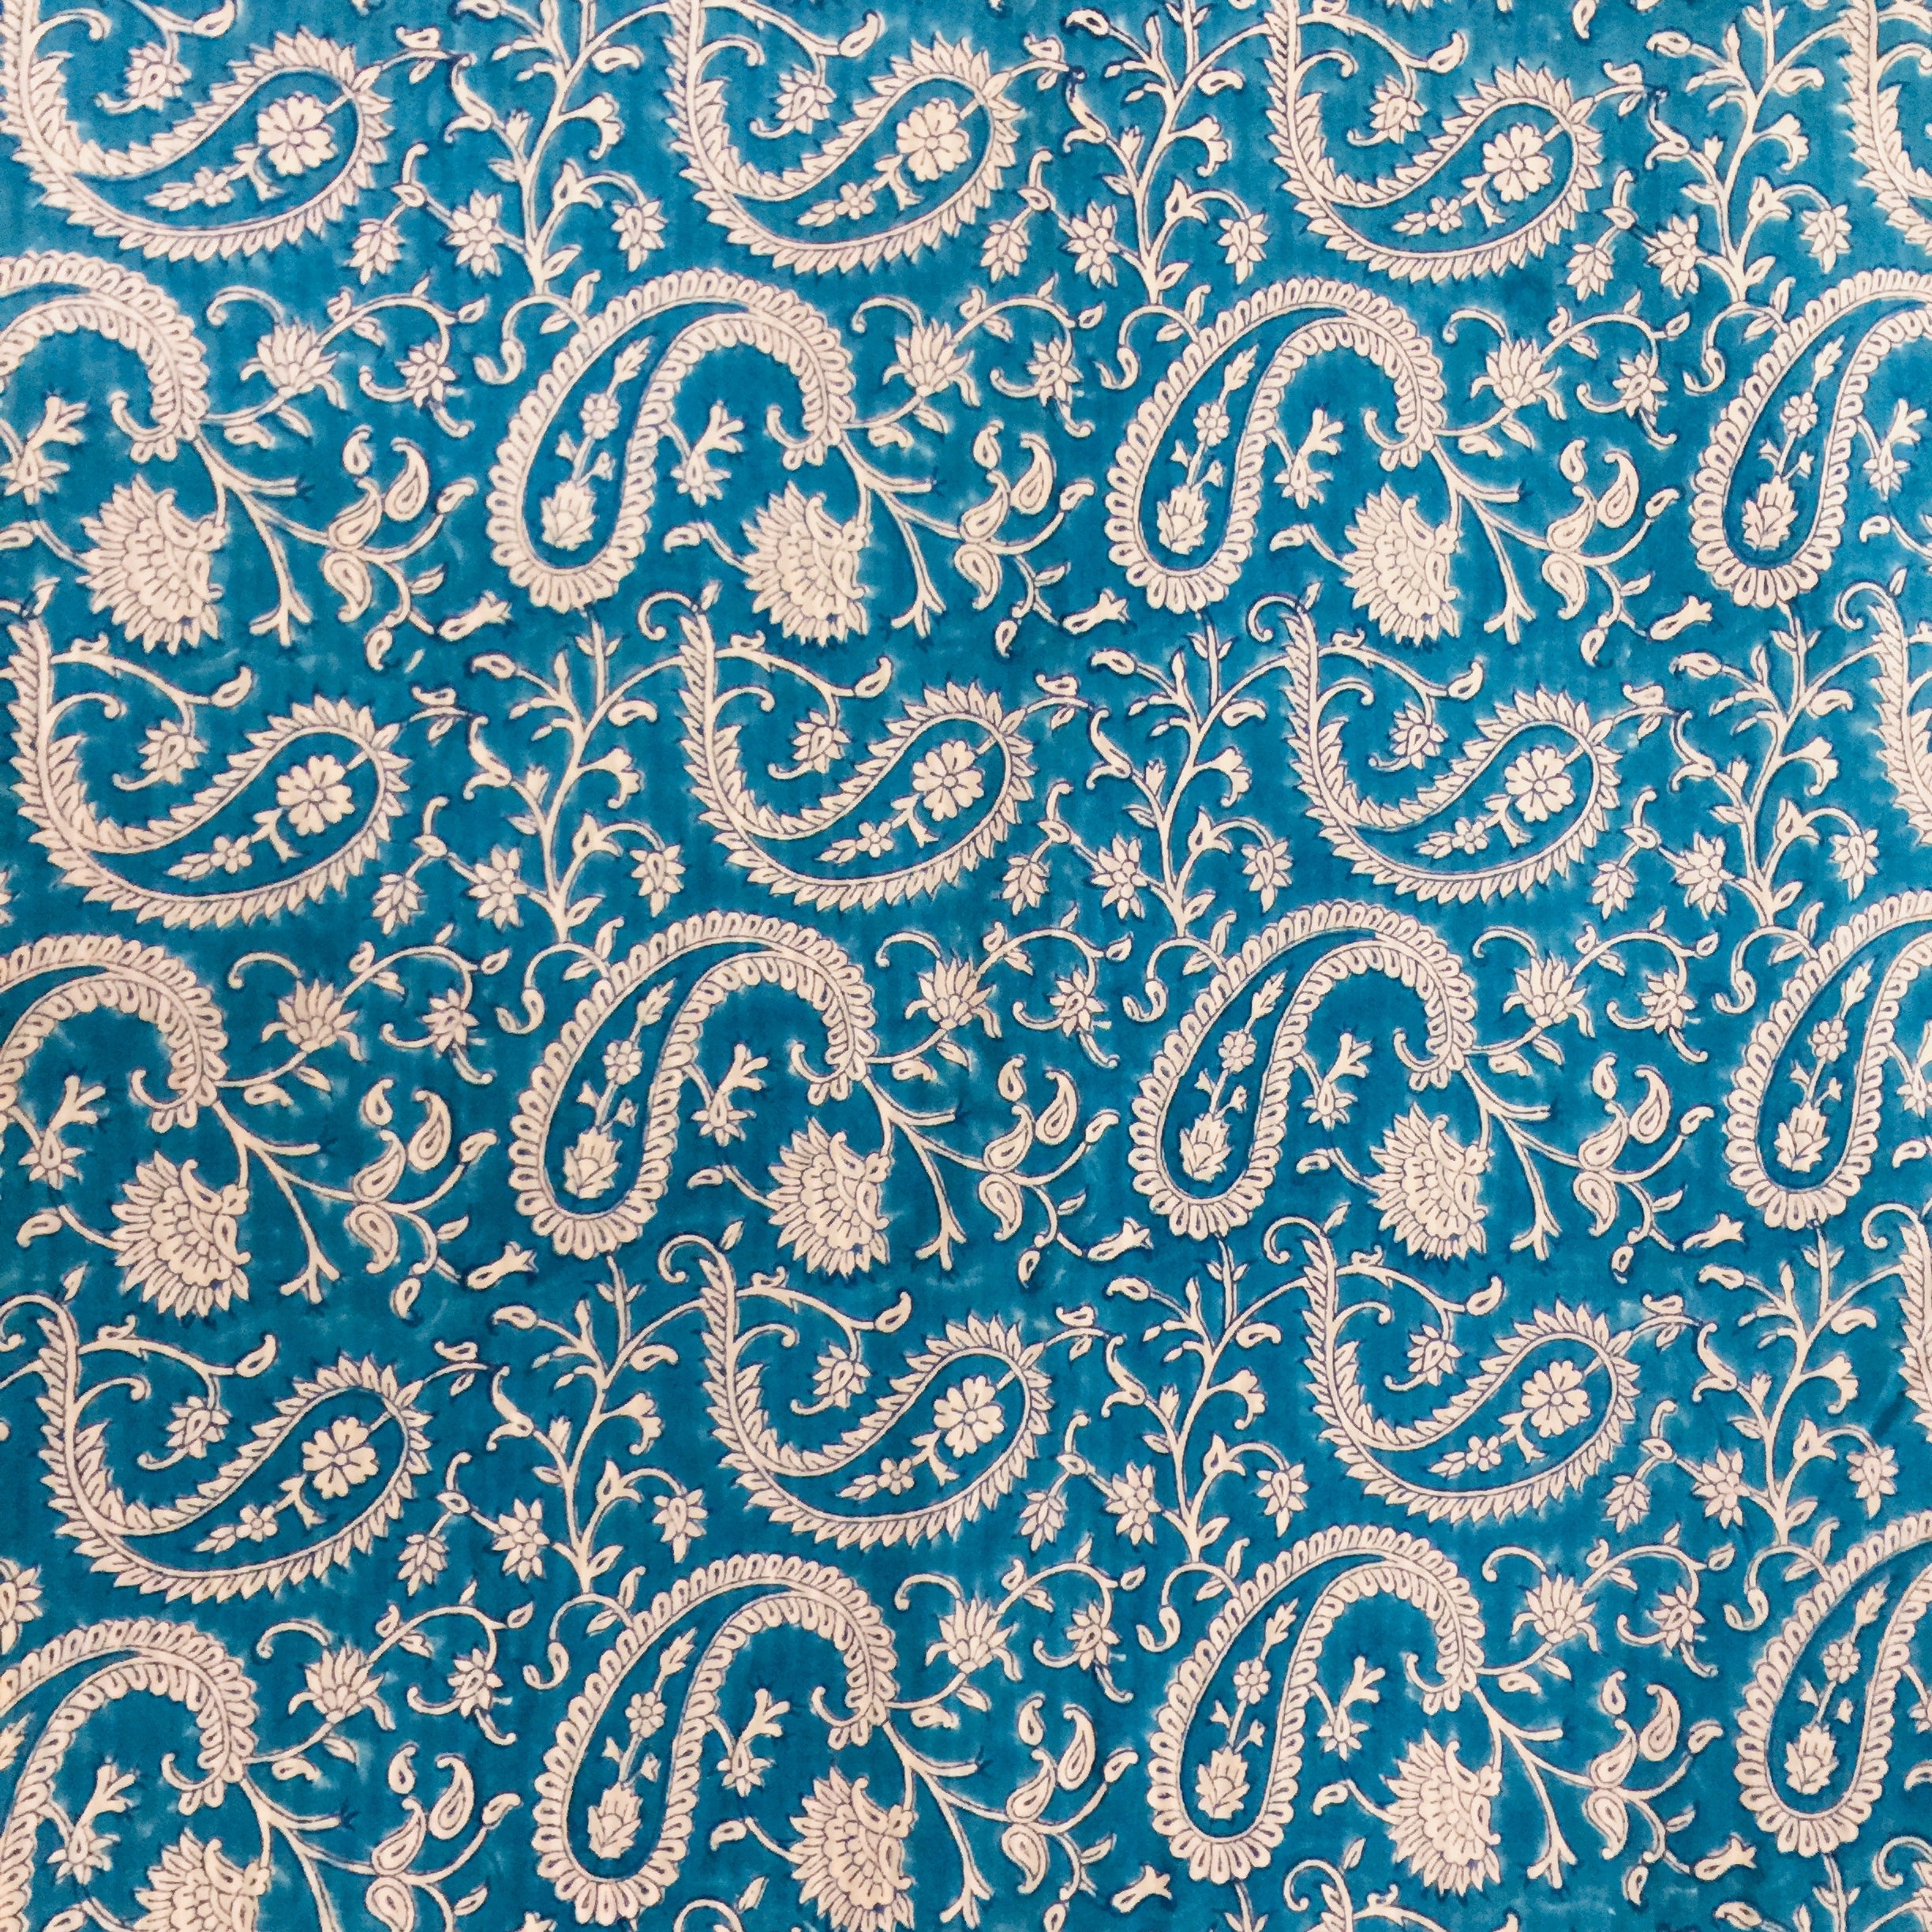 Teal paisley duvet cover - Vintage India NYC